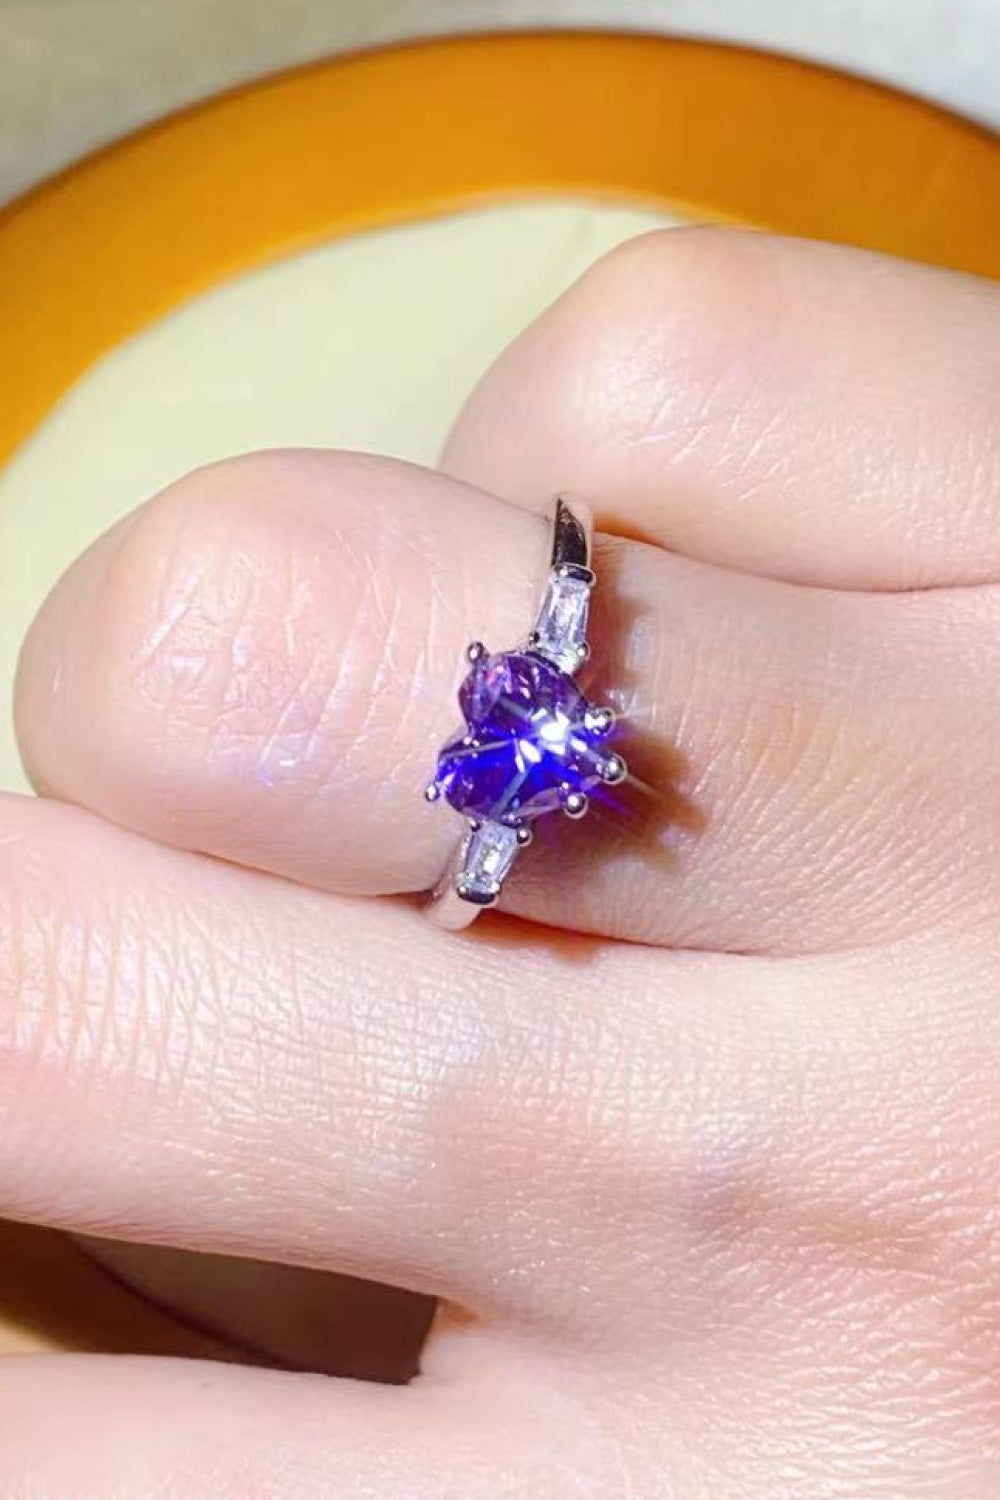 1 Carat Moissanite Heart-Shaped Platinum-Plated Ring in Purple - AllIn Computer